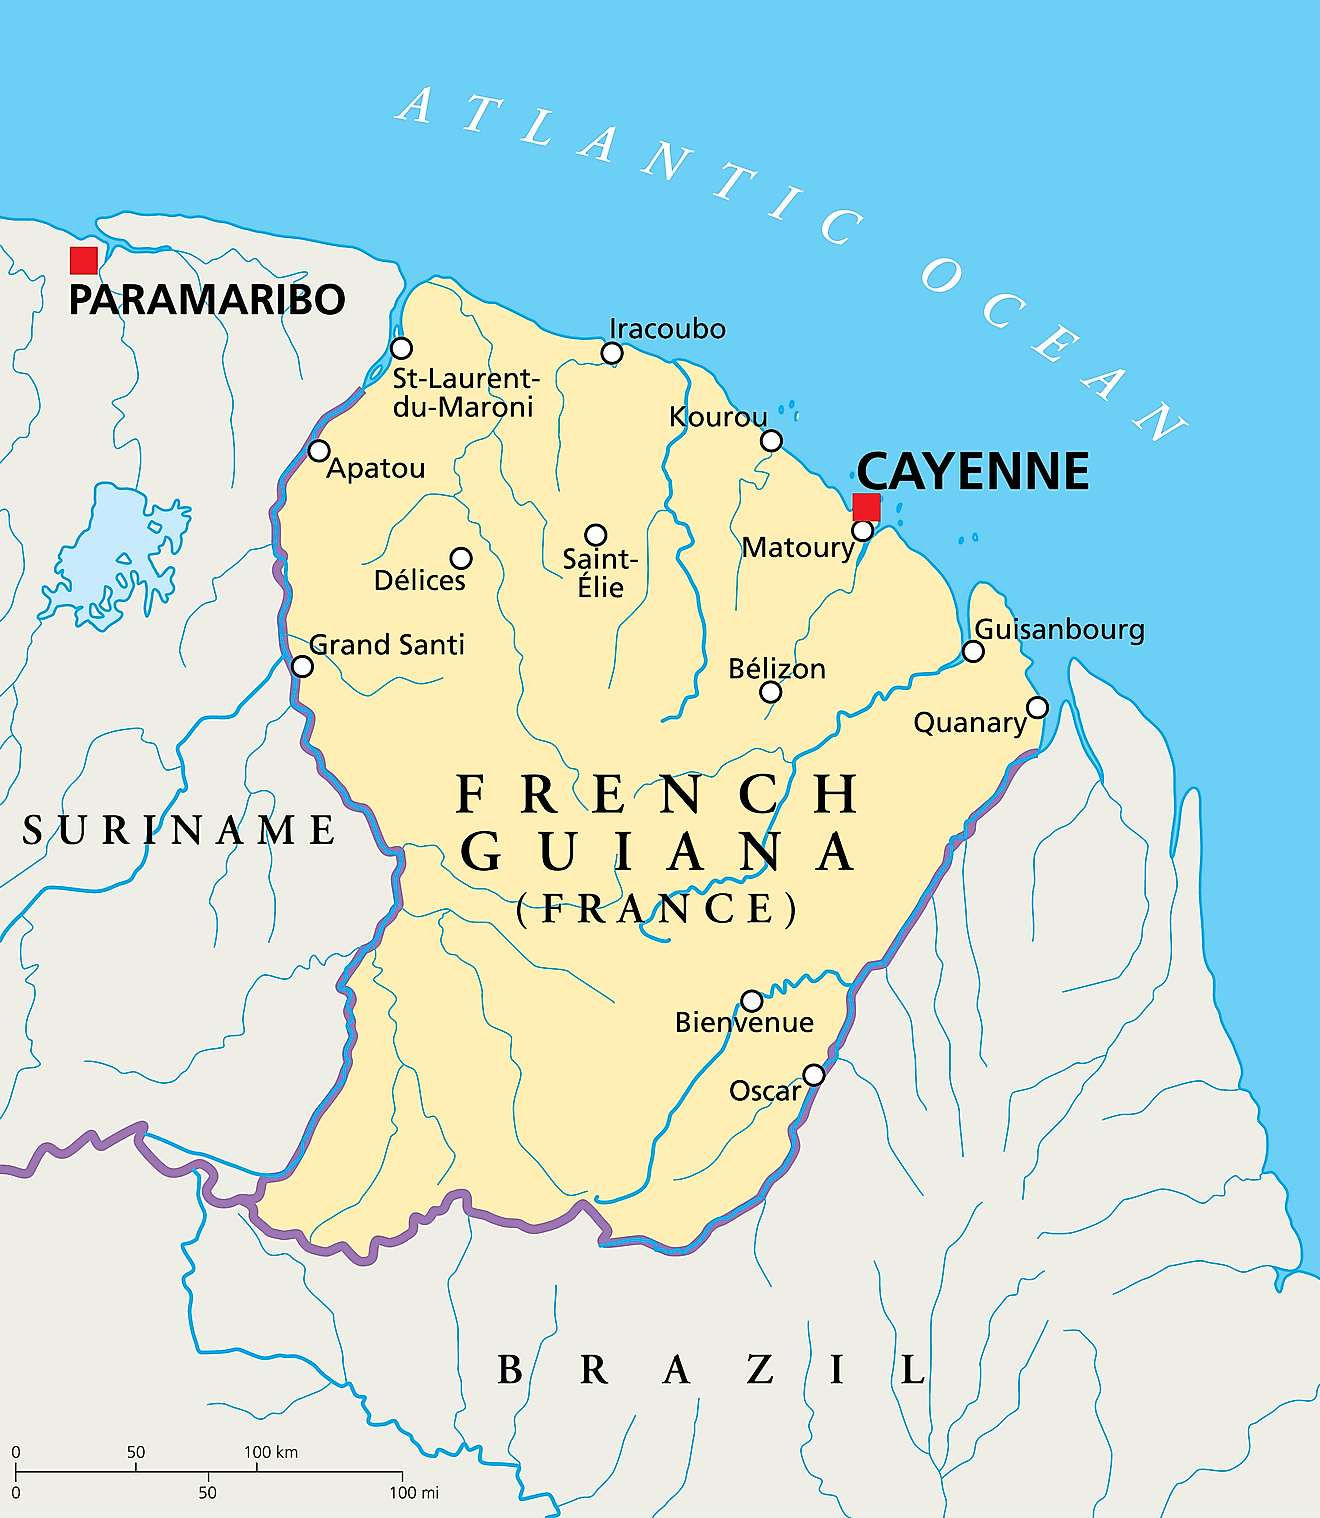 Political Map of French Guiana showing its capital - Cayenne.